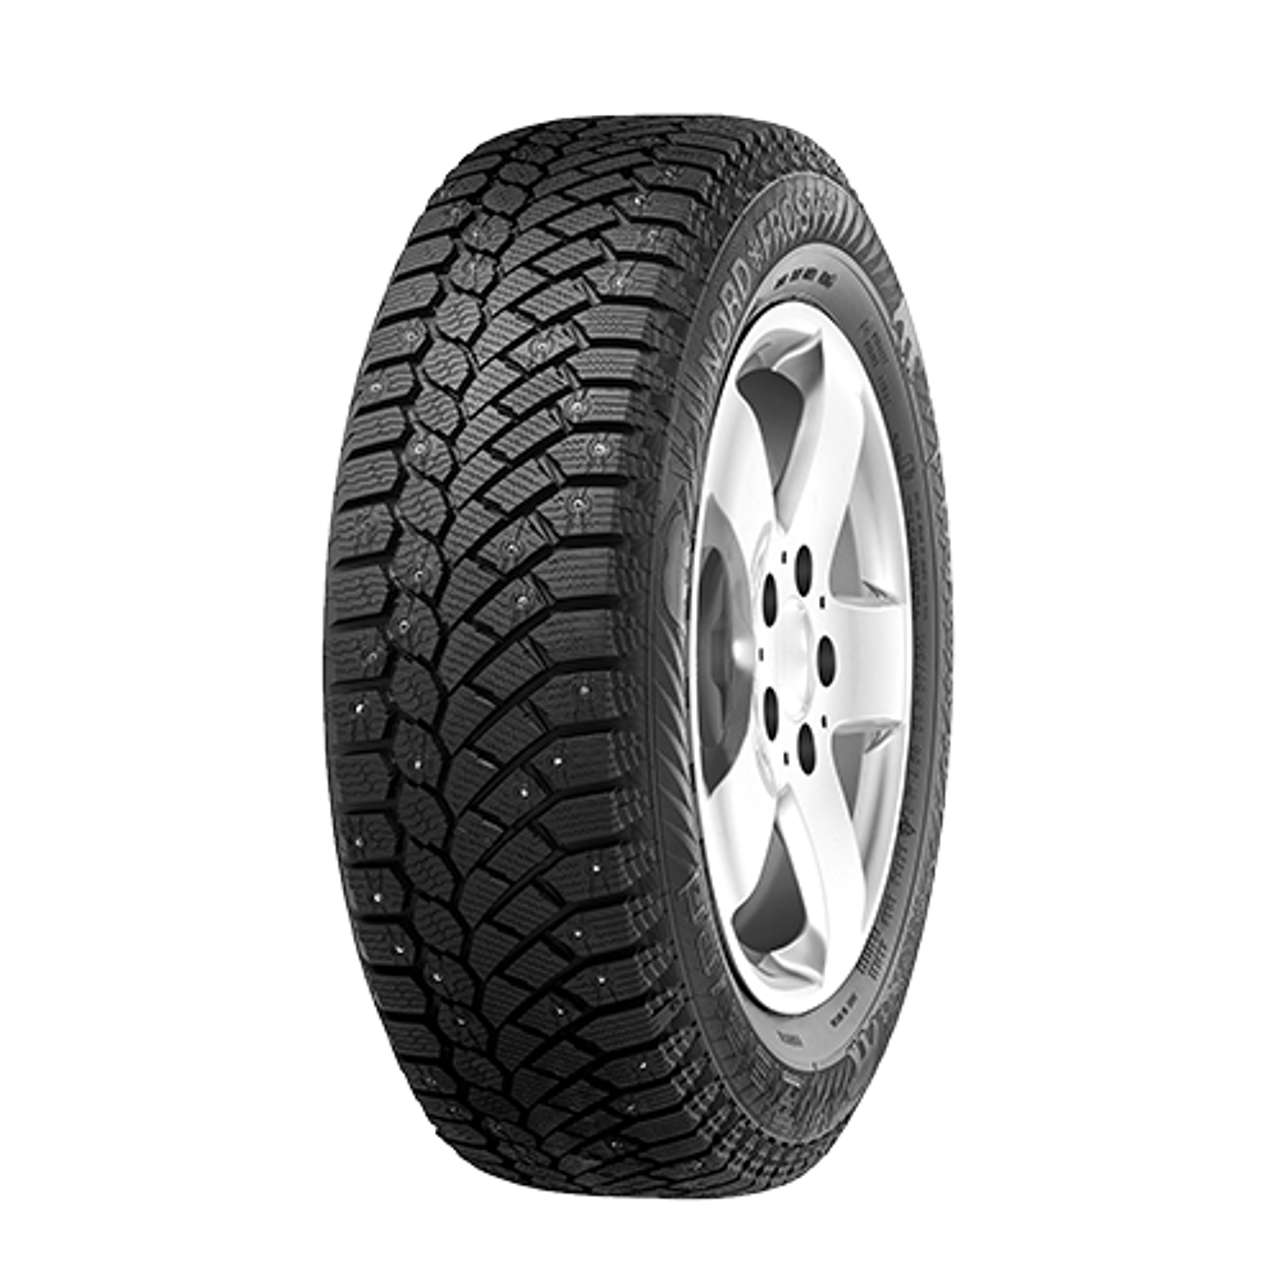 GISLAVED NORD*FROST 200 245/45R17 99T STUDDABLE BSW von GISLAVED